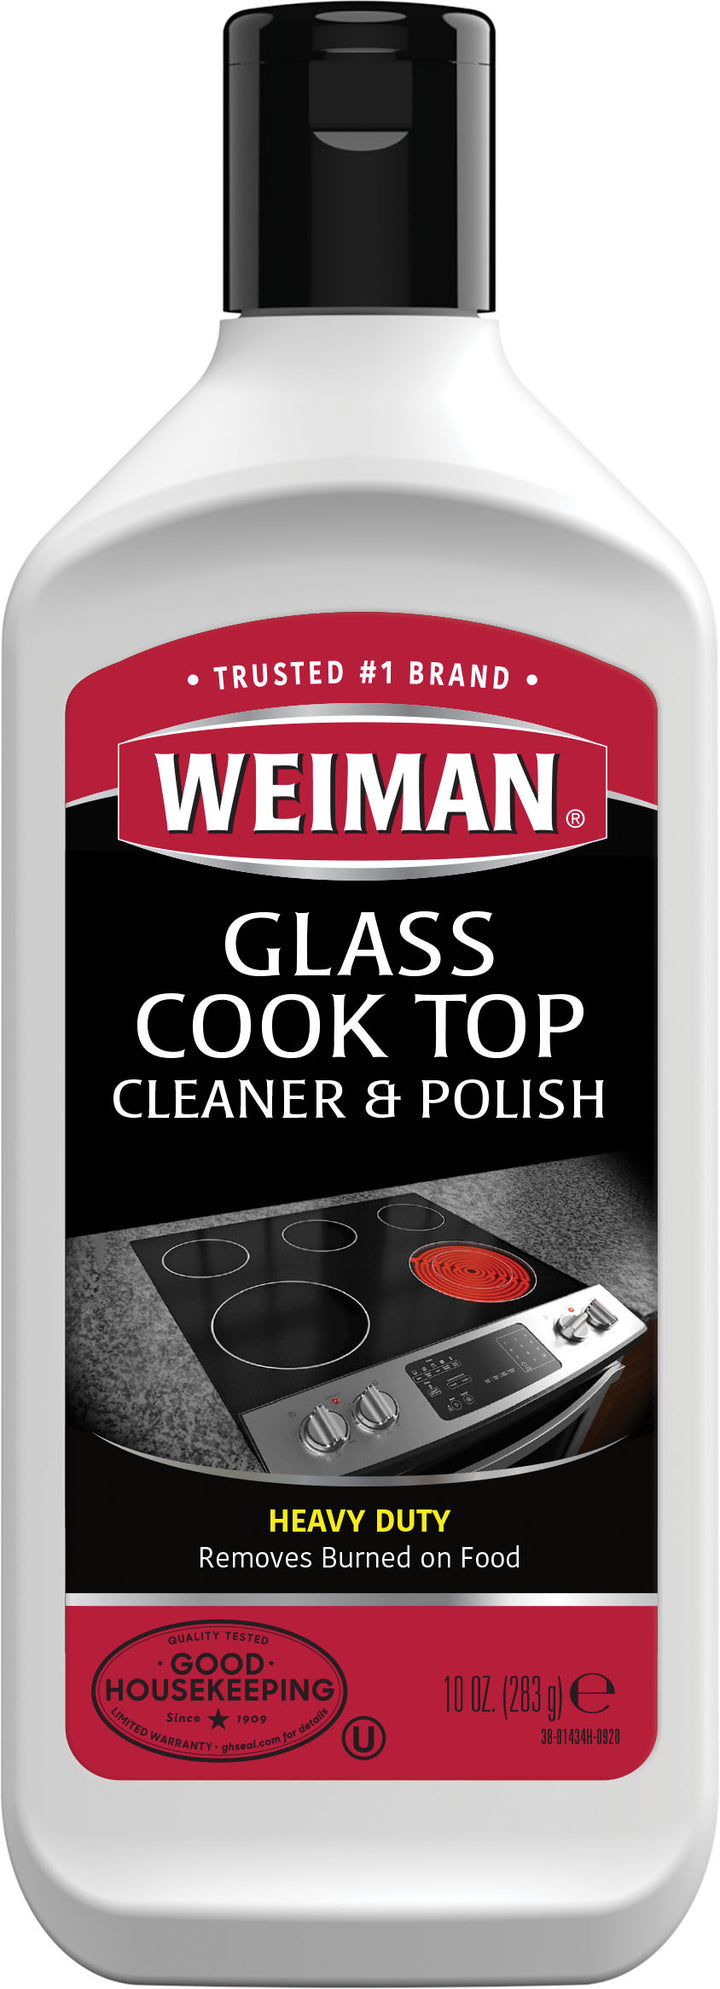 Weiman Glass Cook Top Clean & Polish-10 oz.-6/Case